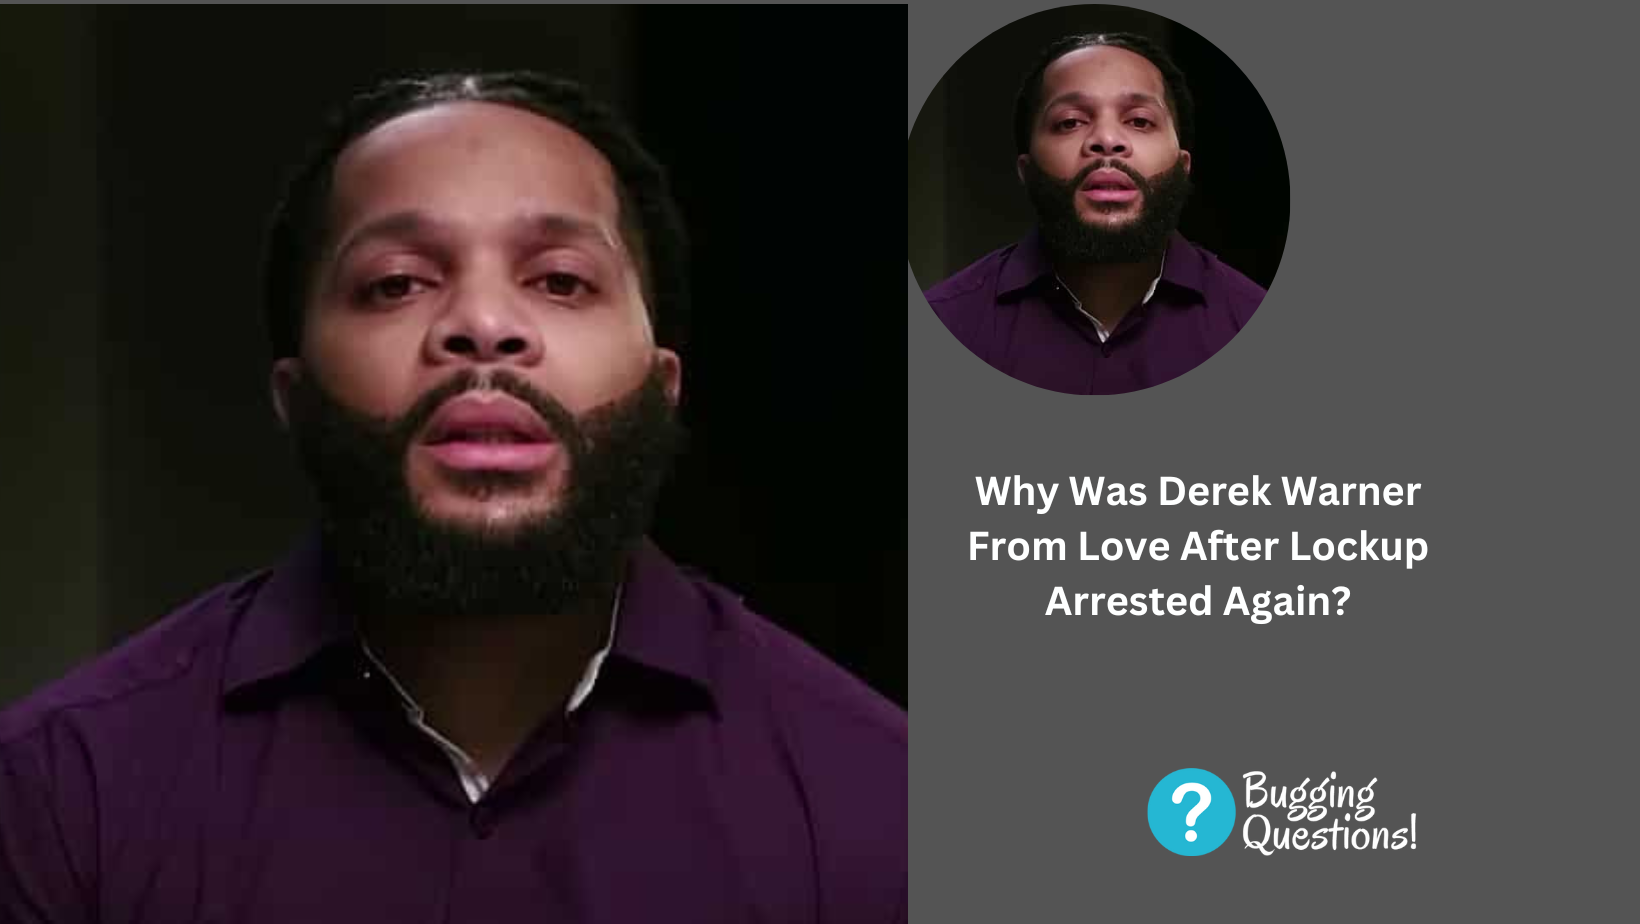 Why Was Derek Warner From Love After Lockup Arrested Again?